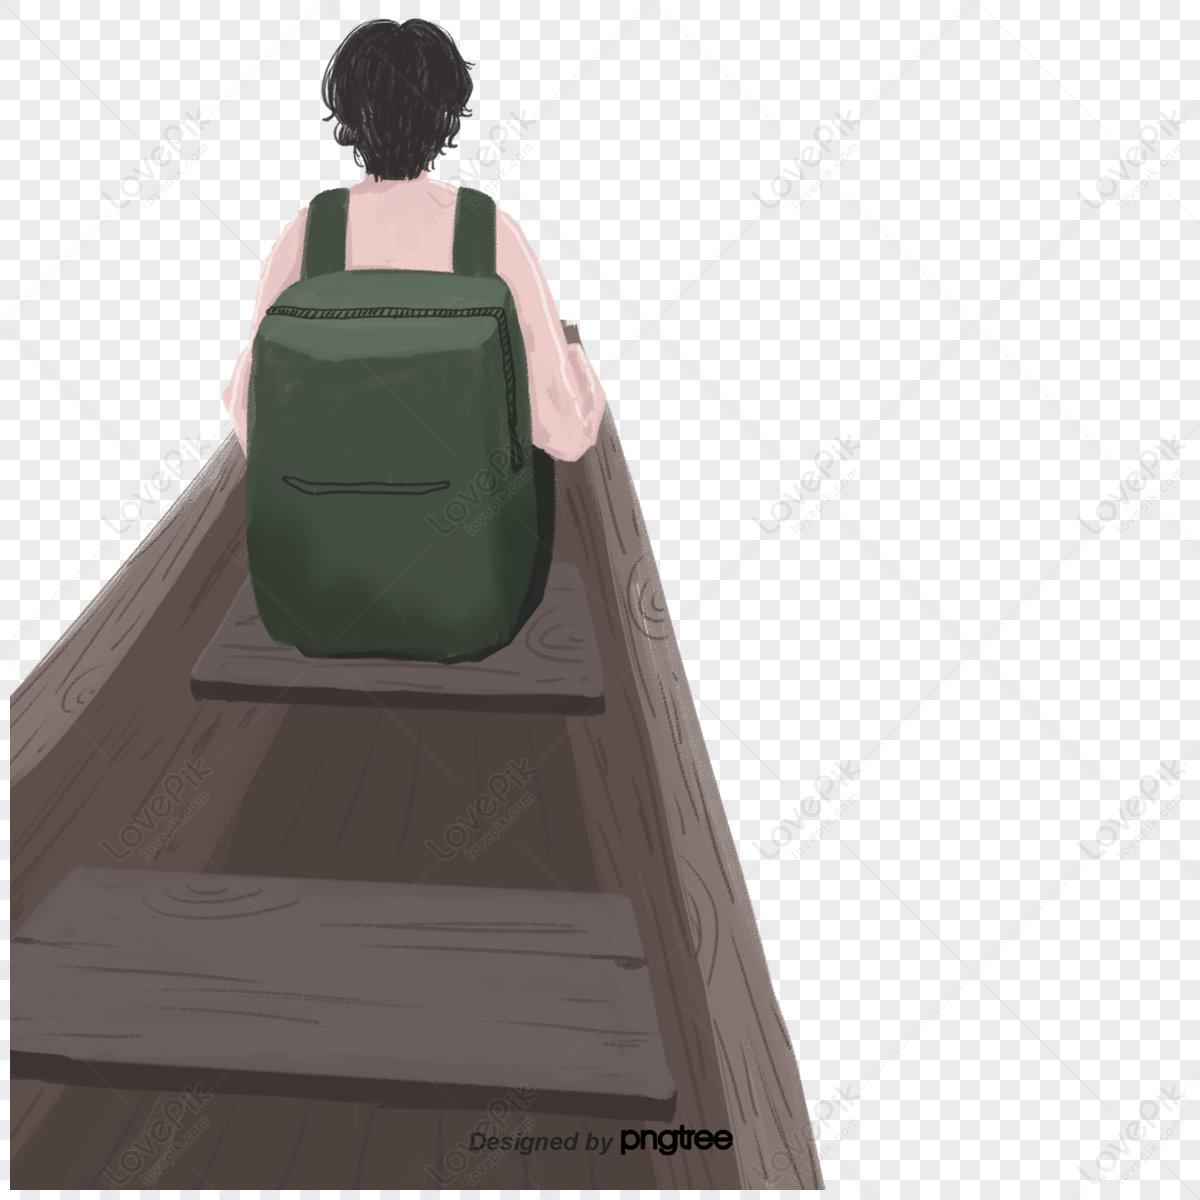 Cartoon sits in the bow of a boat carrying a traveling bag on the back of a boy png transparent background